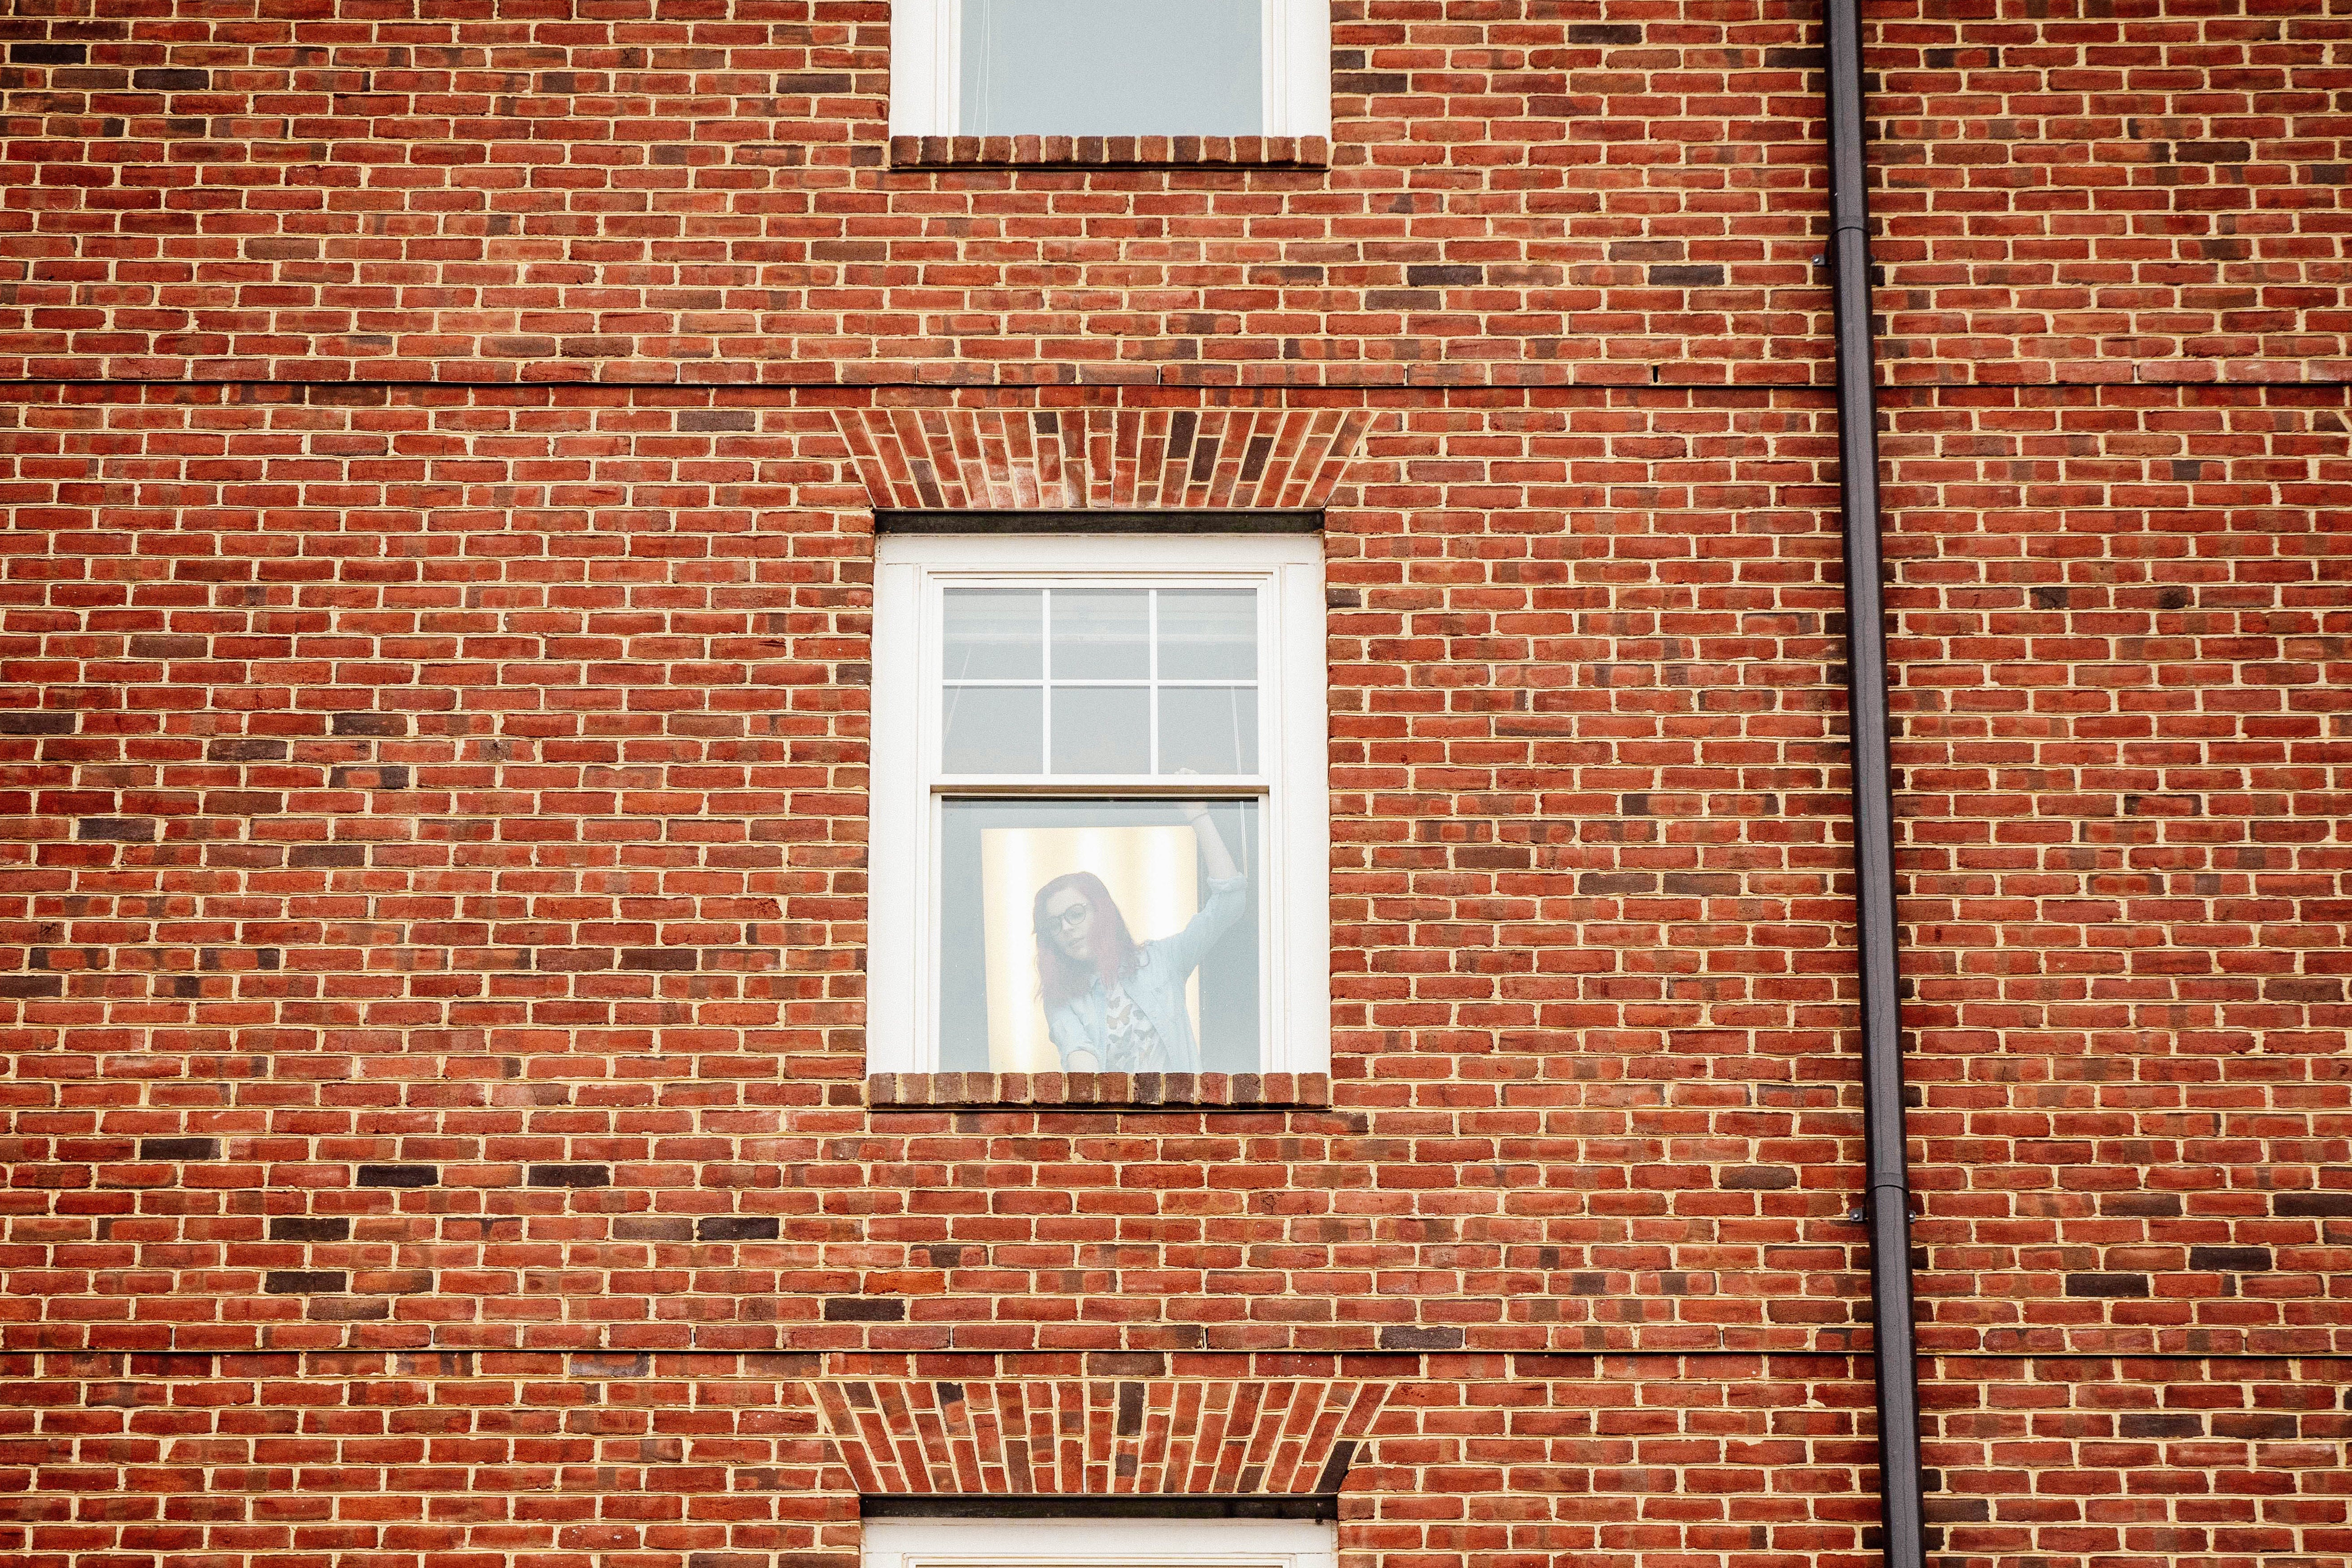 A young woman viewed through her window in a brick building.